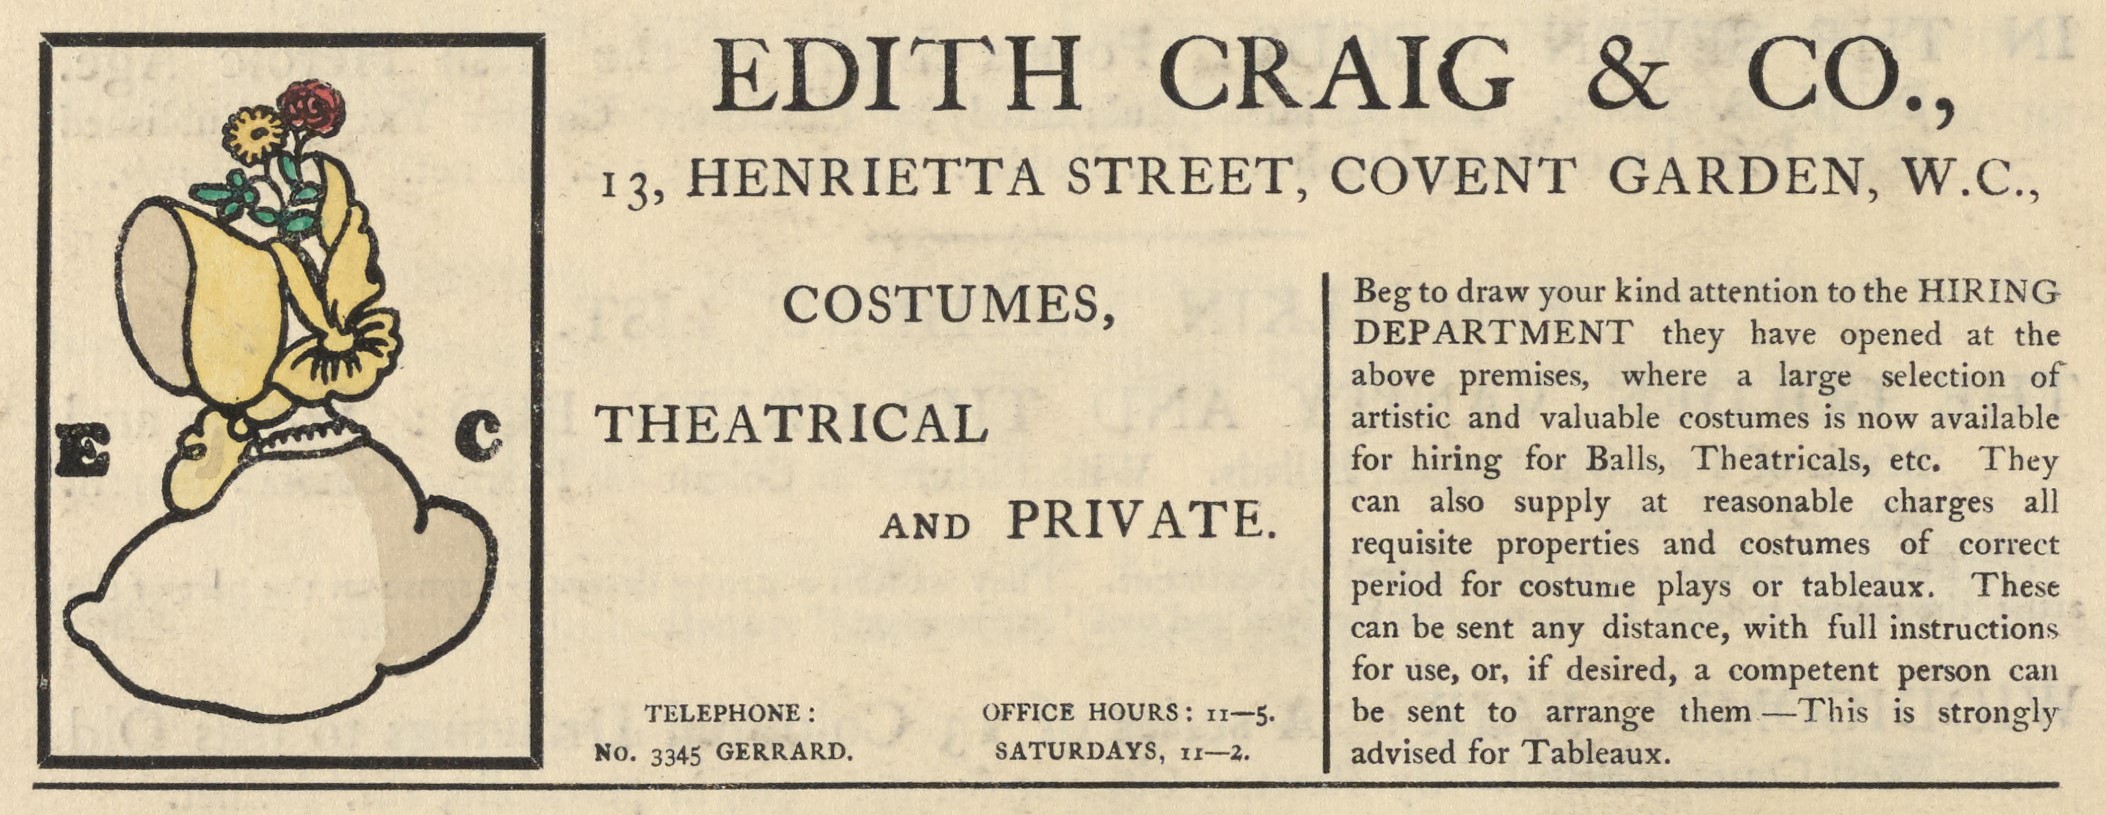 The illustrated advertisement occupies the top third of the page of advertisements. The ad is titled “Edith Craig & Co.,” in a large serif font. Below the title, an address is printed: “13, Henrietta Street, Covent Garden, W.C.” To the left of the text is a small, coloured illustration with a black rectangular frame. It depicts a woman from the shoulders up, in profile, wearing a bonnet that hides her face. The bonnet is decorated with a pale yellow ribbon on the side and has two flowers with green leaves – a yellow daisy and a red rose – emerging from its top. The bonnet is a light yellow and the edge of her dress is coloured grey. The initials “E” and “C” are positioned to either side of the woman, in a heavy serif font. The text of the ad is divided into two columns beneath the title and address, and reads “Costumes, theatrical and private. Telephone: No. 3345 Gerrard. Office hours: 11-5. Saturdays, 11-2. Beg to draw your attention to the HIRING DEPARTMENT they have opened at the above premises, where a large selection of artistic and valuable costumes is now available for hiring for Balls, Theatricals, etc. They can also supply at reasonable charges all requisite properties and costumes of correct period for costume plays or tableaux. These can be sent any distance, with full instructions for use, or, if desired, a competent person can be sent to arrange them.—This is strongly advised for Tableaux.”